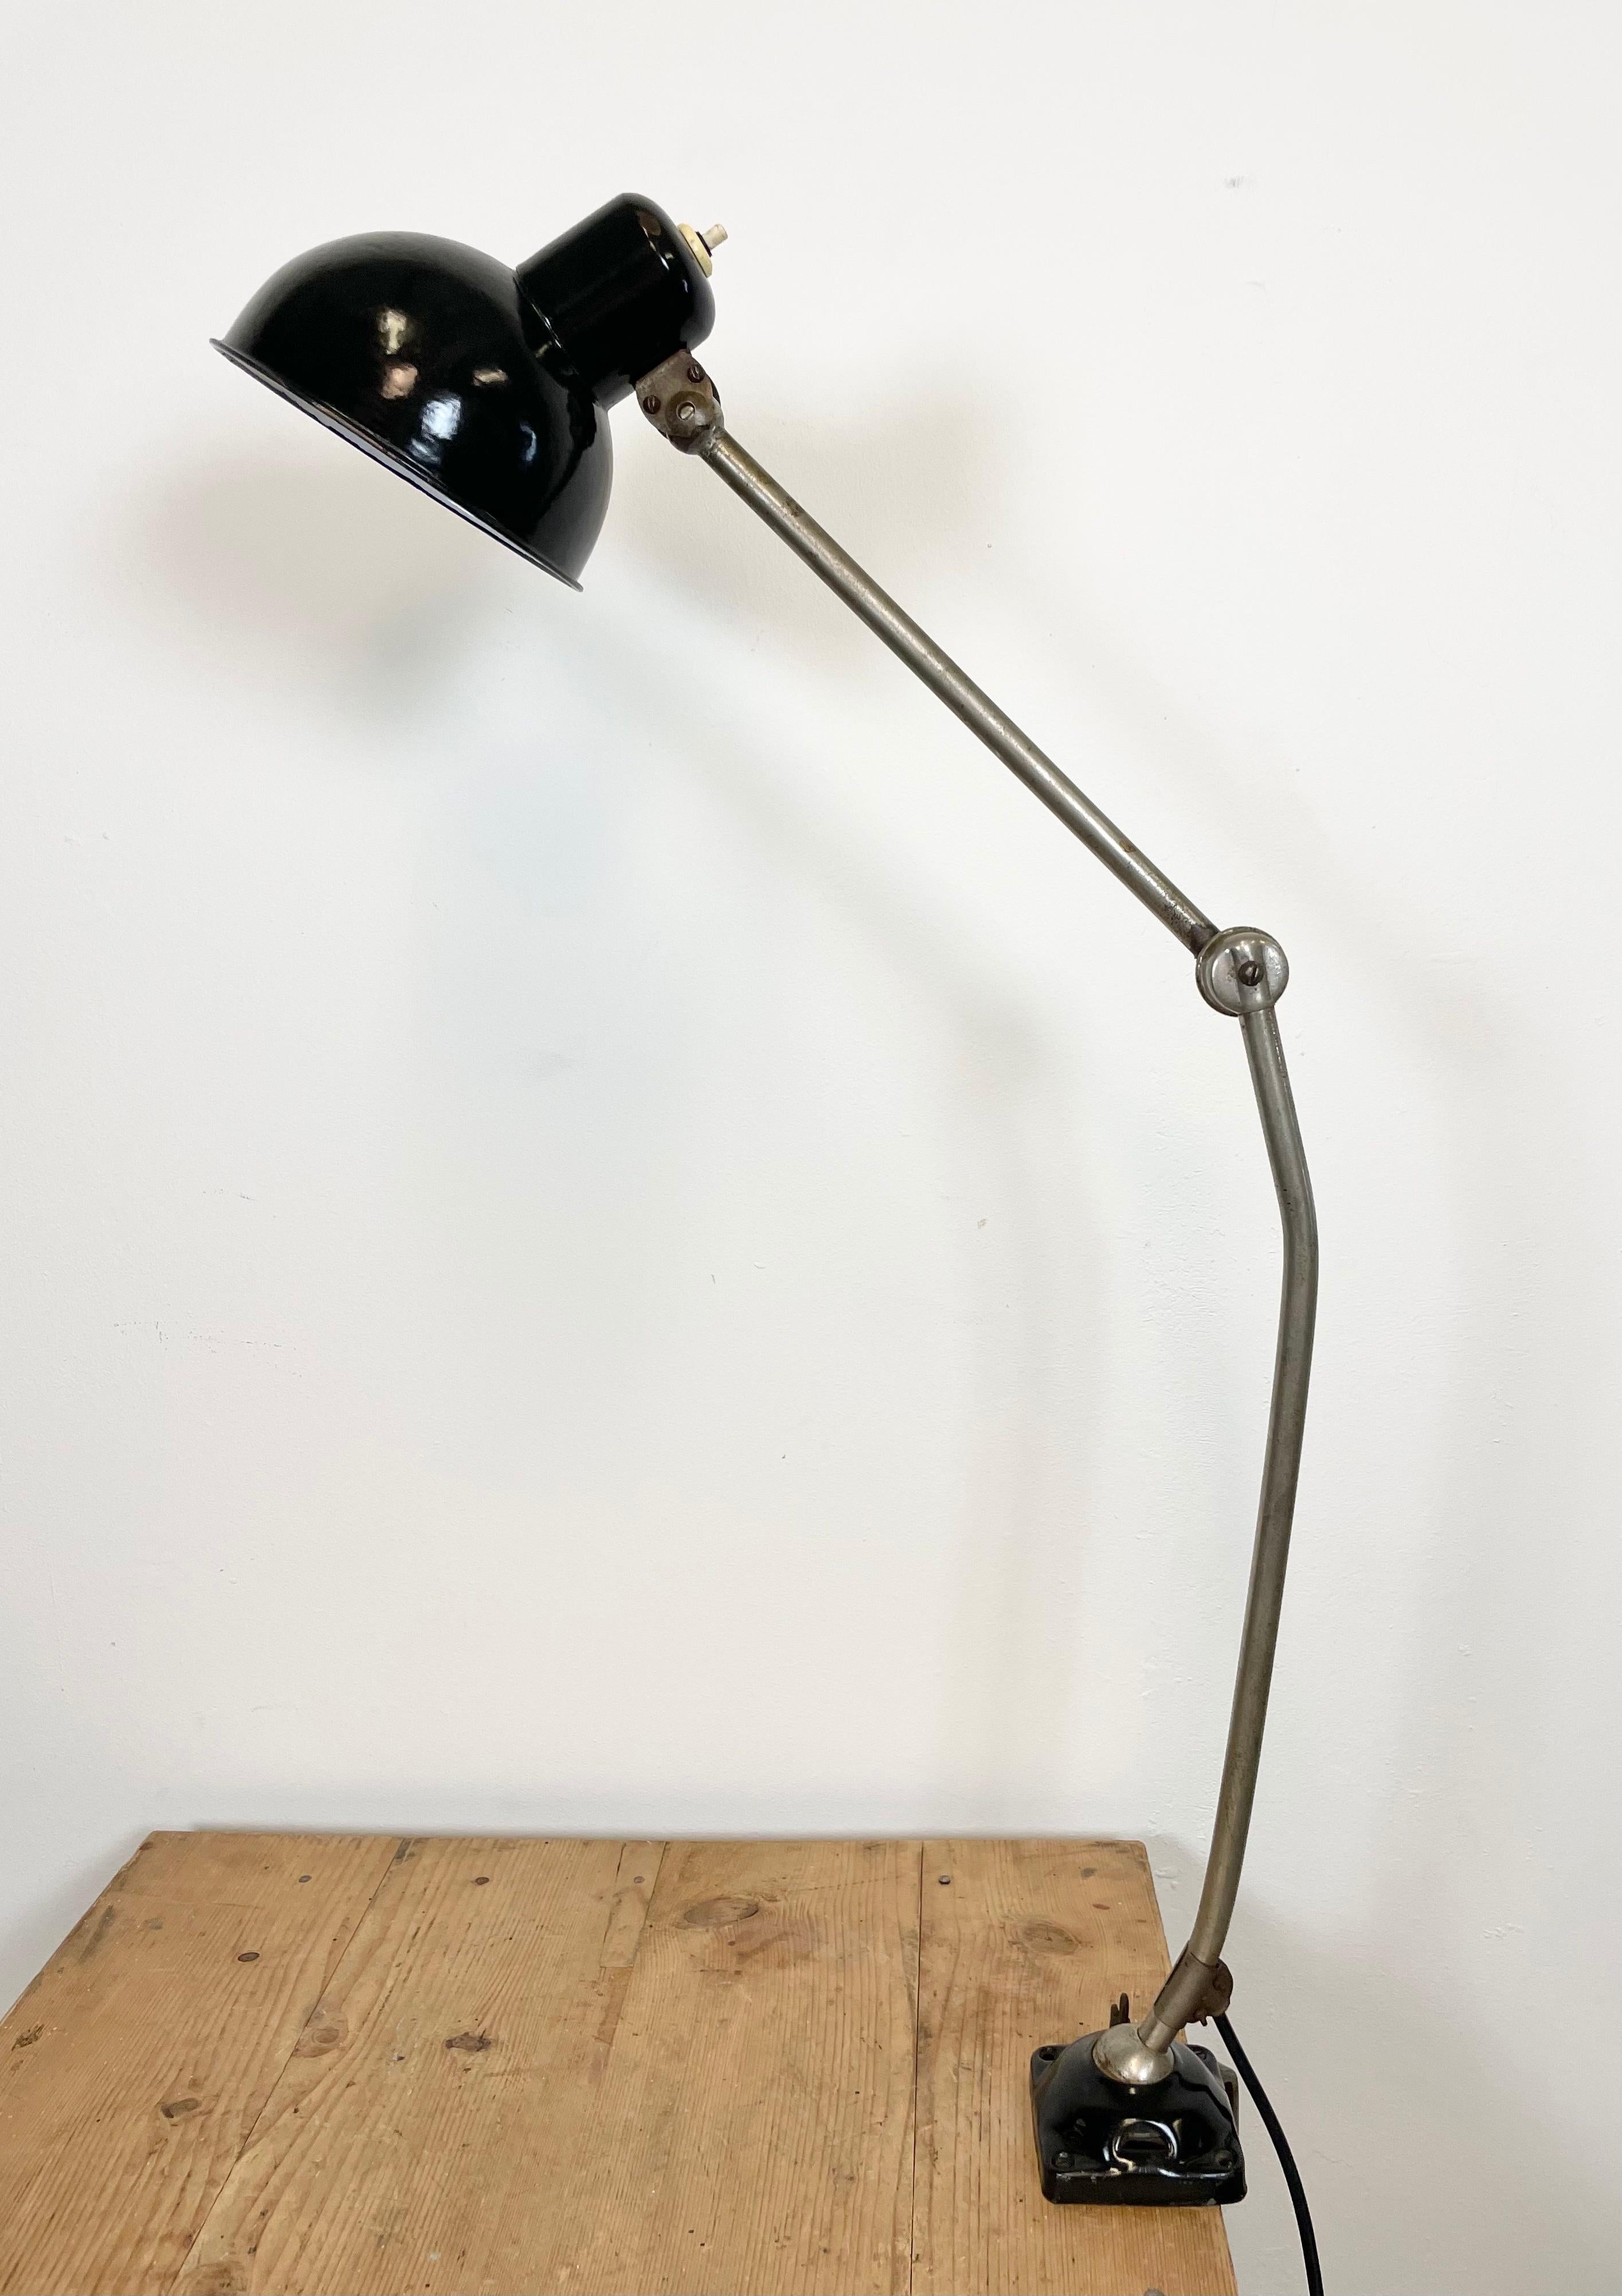 Industrial table lamp made in former Czechoslovakia during the 1950s.It features a black enamel shade with white interior, an iron base and arm with three adjustable joints. The switch is situated directly on the lampshade.Original bakelite socket